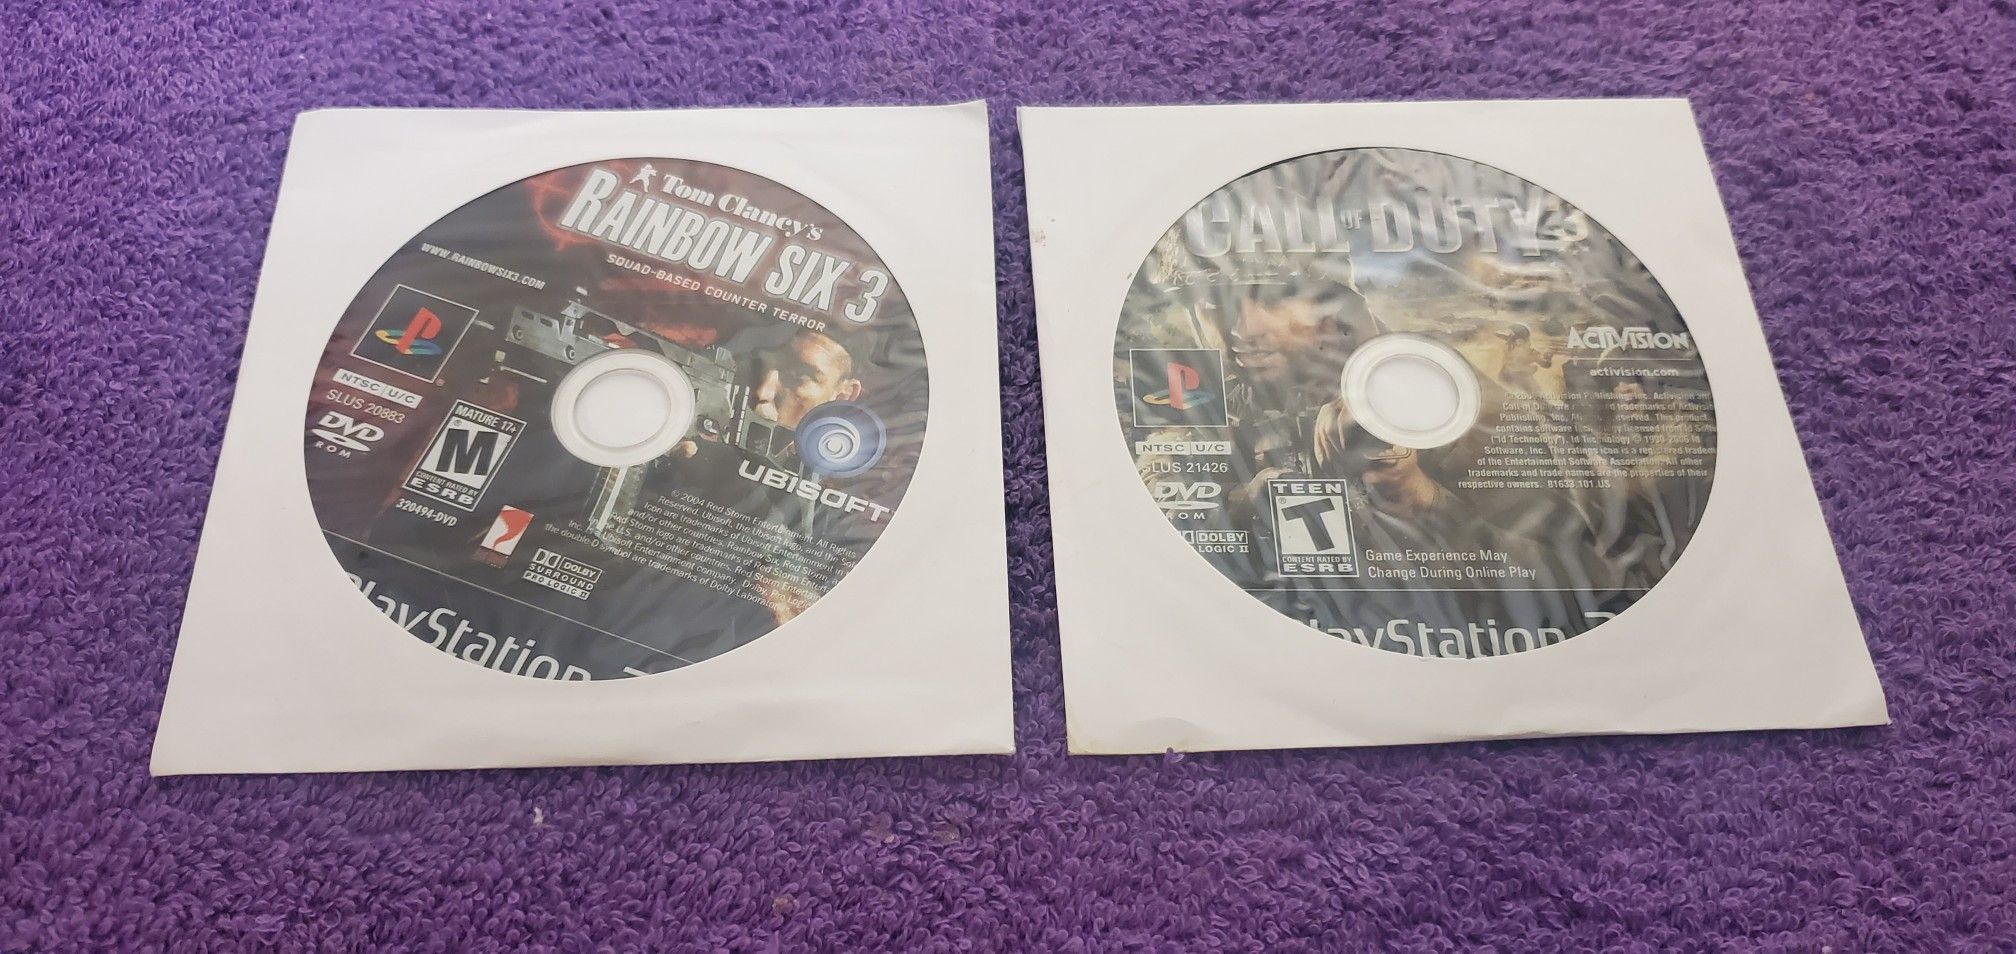 CALL OF DUTY 3 & RAINBOW SIX 3 PS2 GAME DISC ONLY